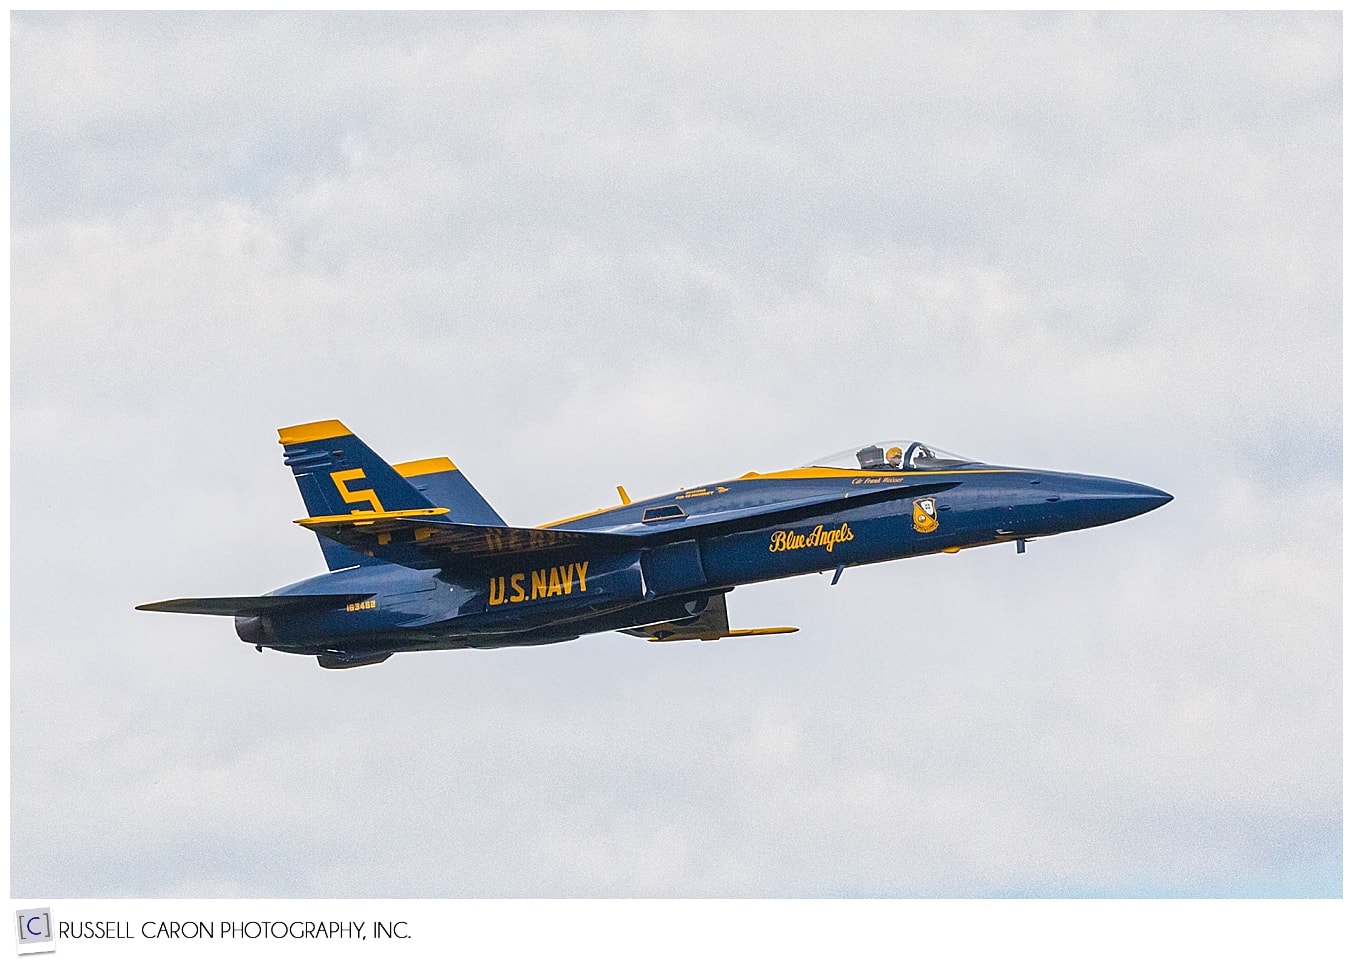 #5 of the US Navy Blue Angels